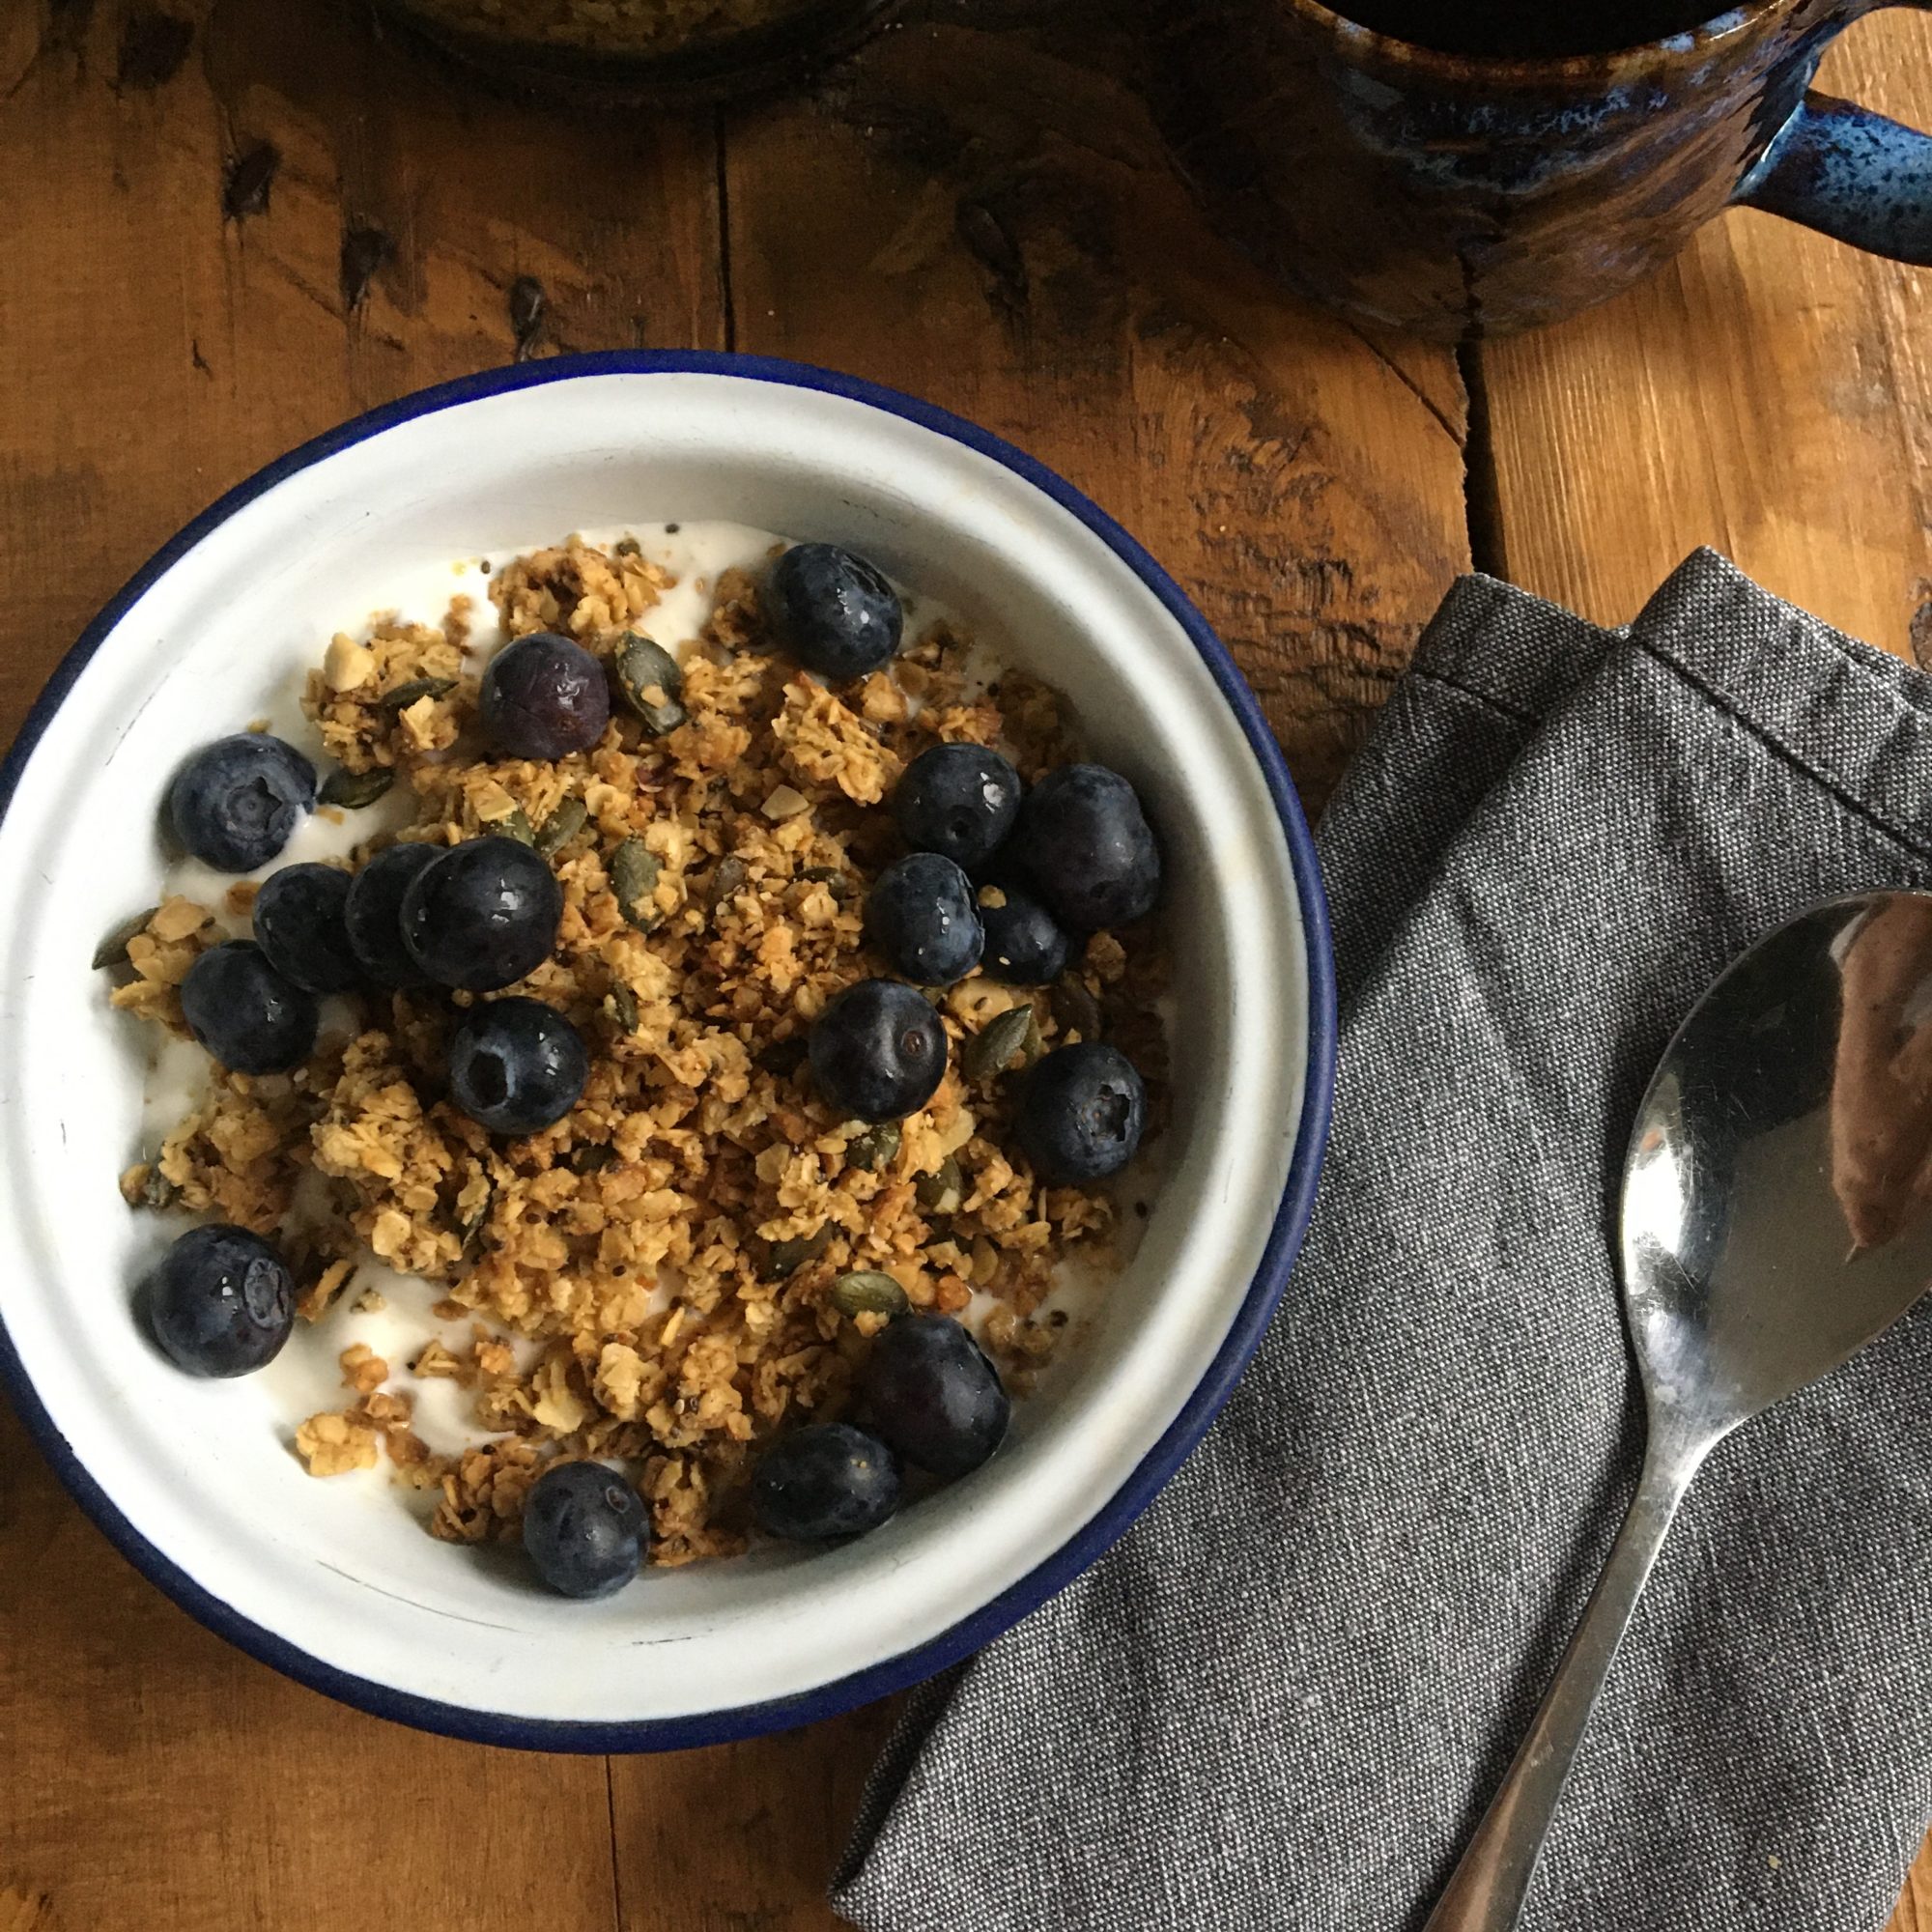 Photo shows an overhead shot of a blue and white enamel bowl full of granola, blueberries and yoghurt, with a blue napkin and silver spoon to the side